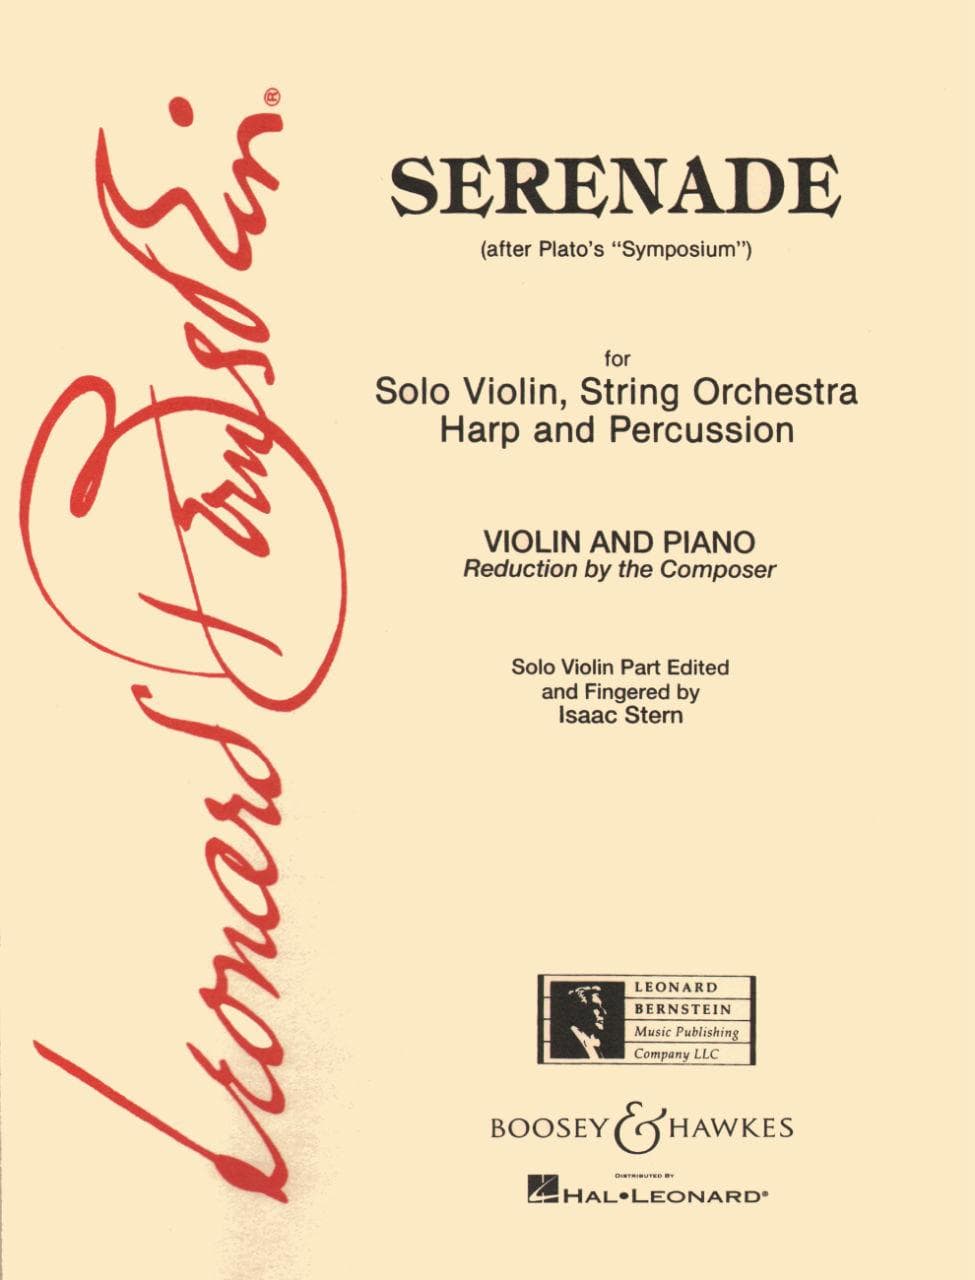 Bernstein, Leonard - Serenade (after Plato's "Symposium") for Violin and Piano - Edited by Stern - Boosey & Hawkes Edition